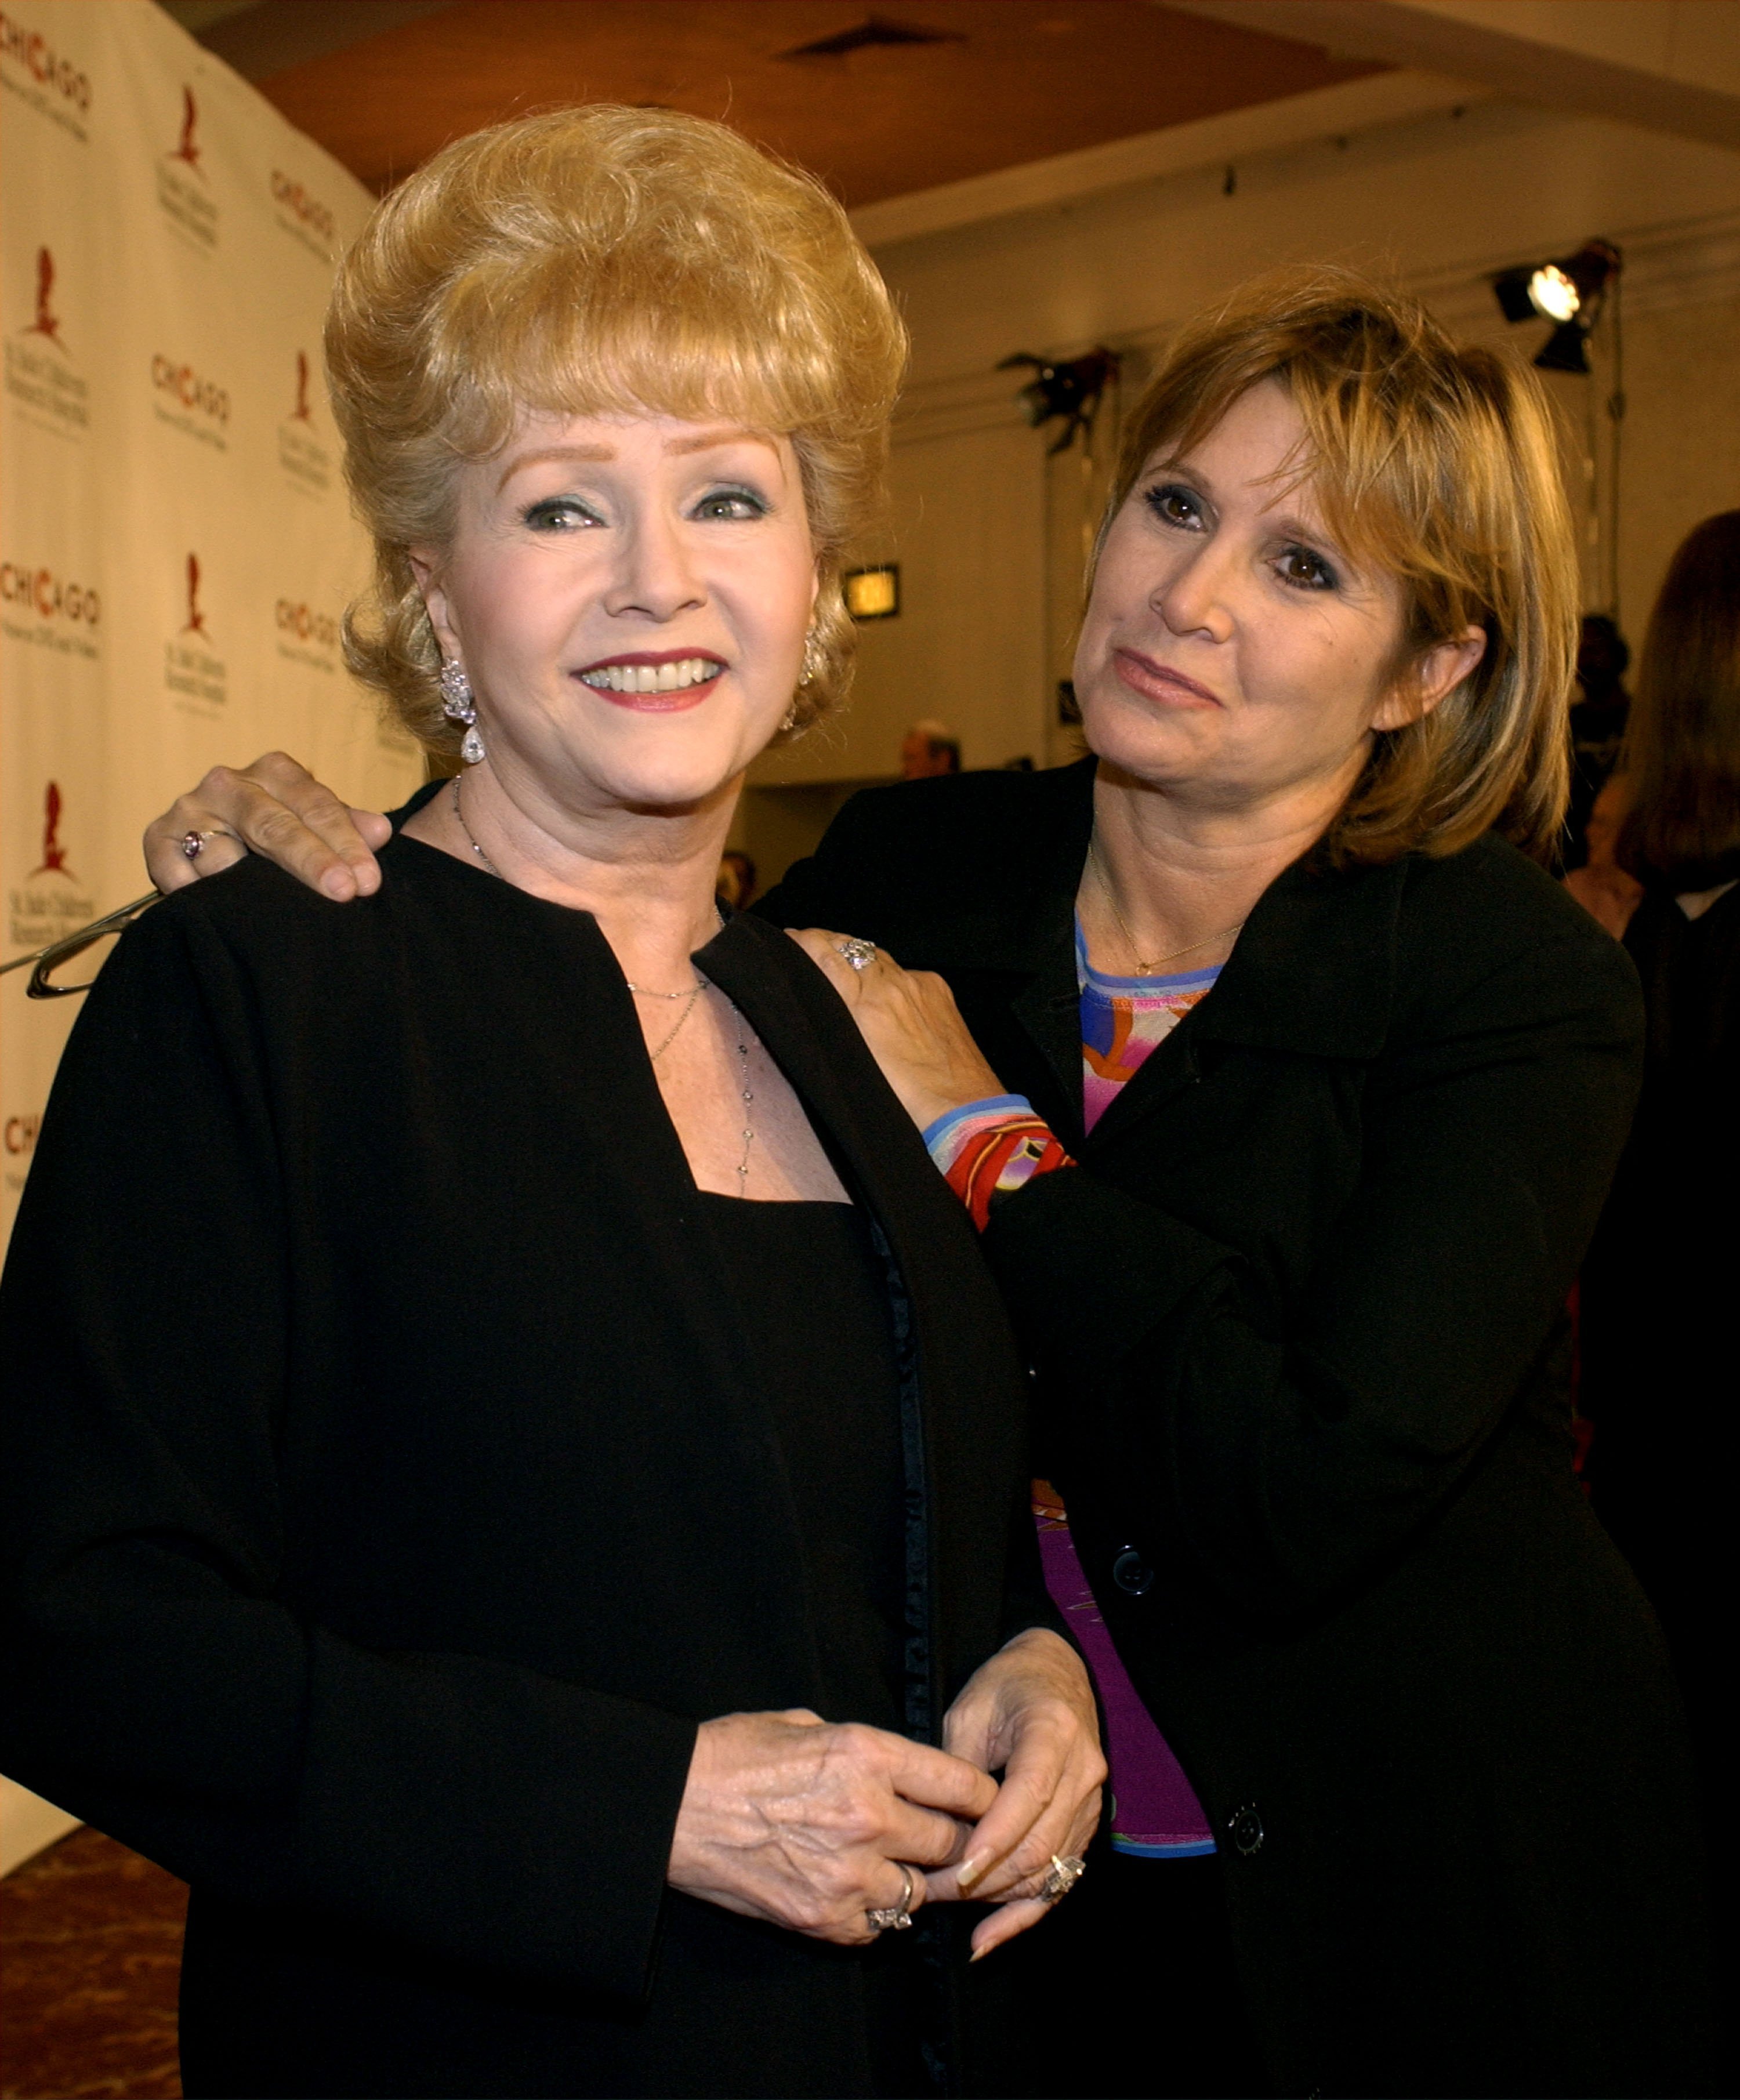 Debbie Reynolds and Carrie Fisher. I Image: Getty Images.